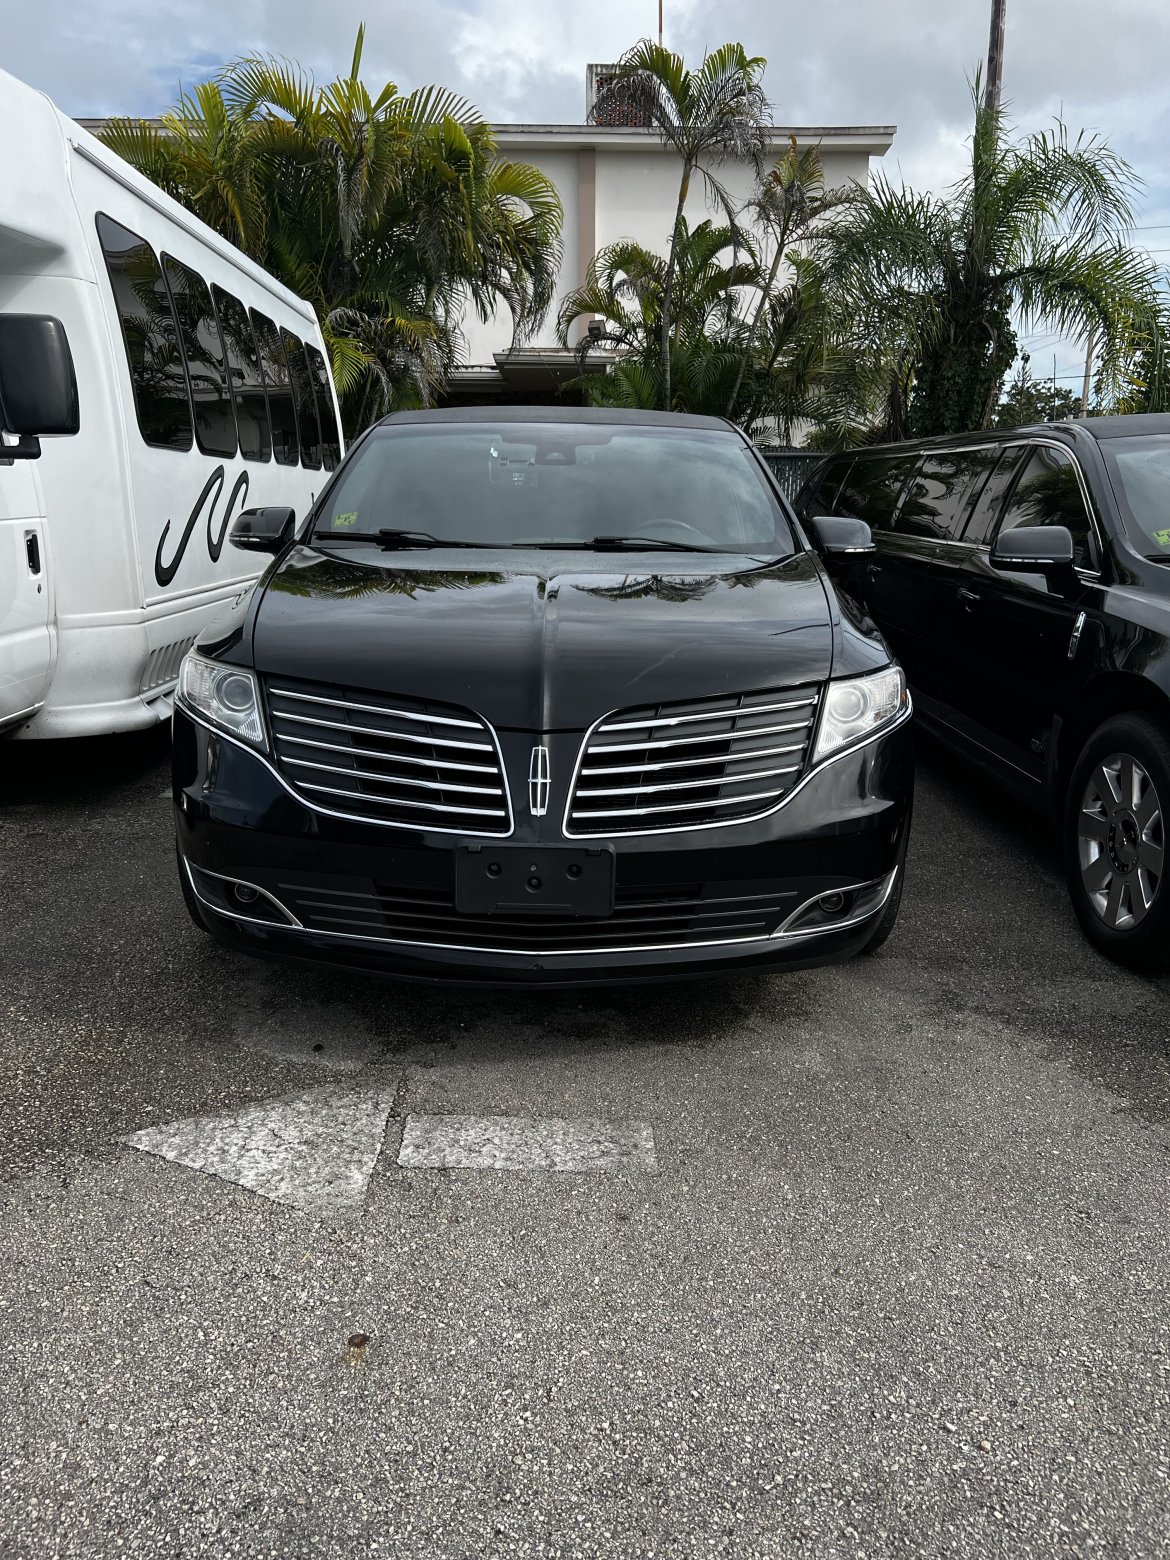 Limousine for sale: 2018 Lincoln MKT 120&quot; by Royale